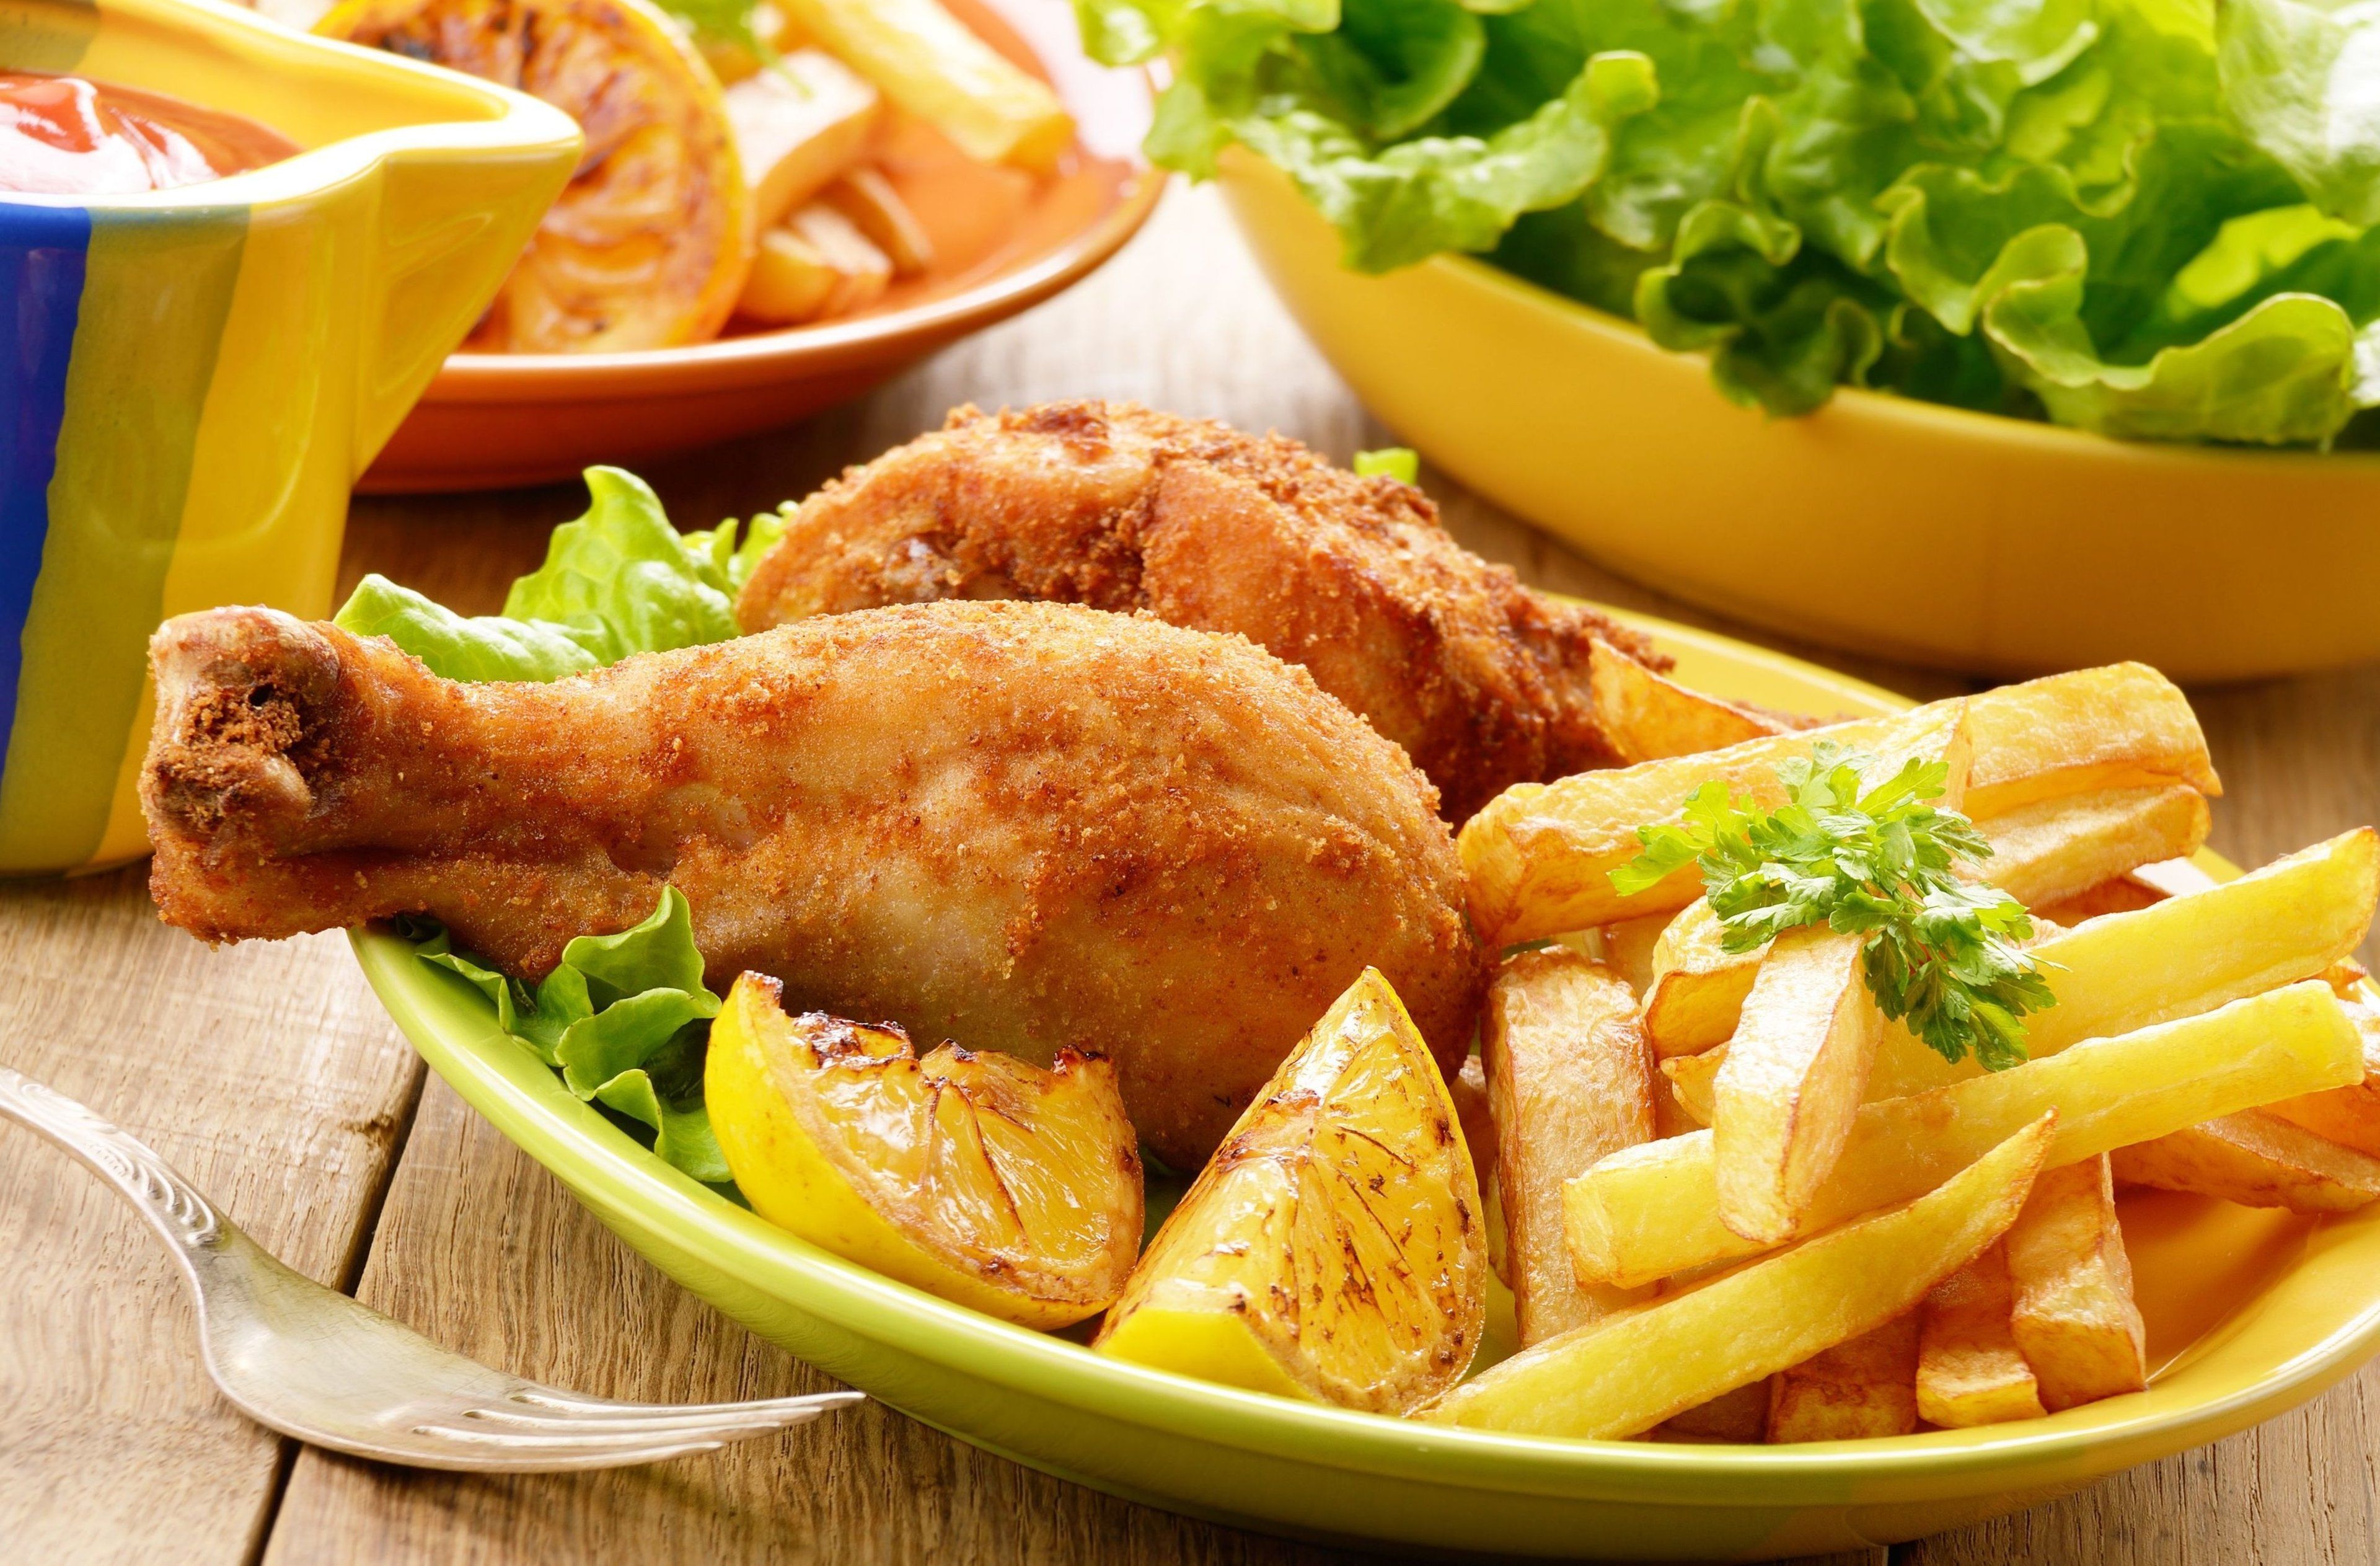 Food meal Chicken fries salad Vegetables delicious wallpaperx2526